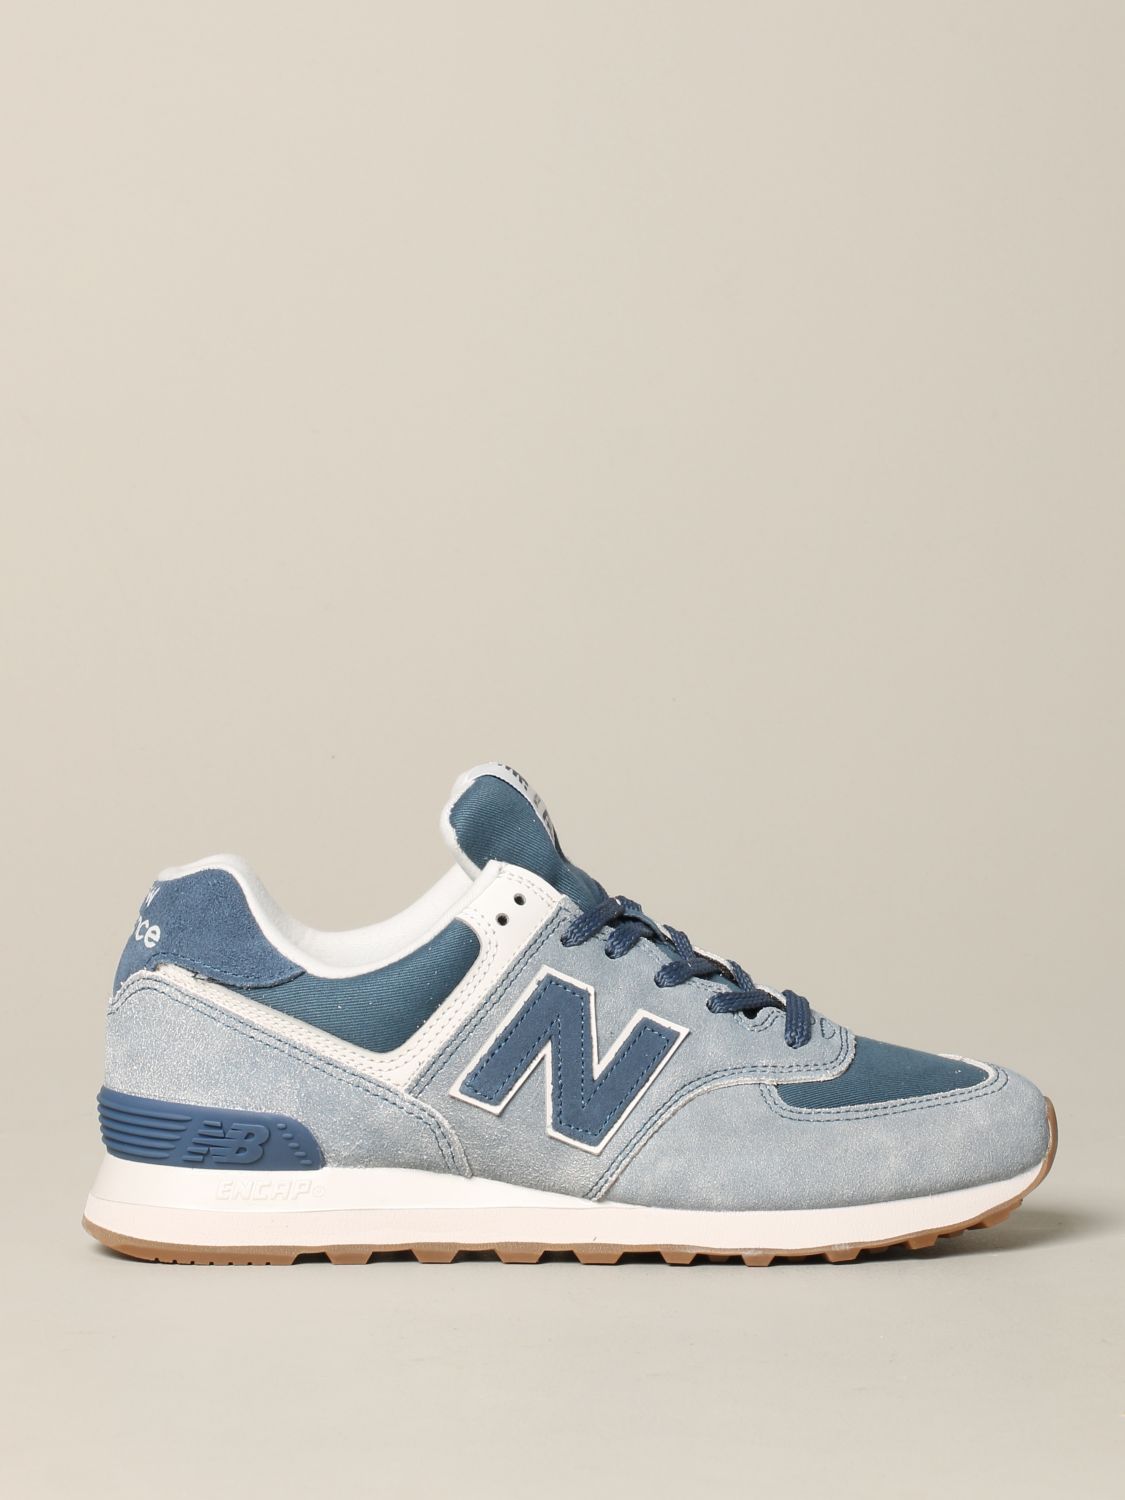 New Balance Outlet: sneakers for man - Blue | New Balance sneakers